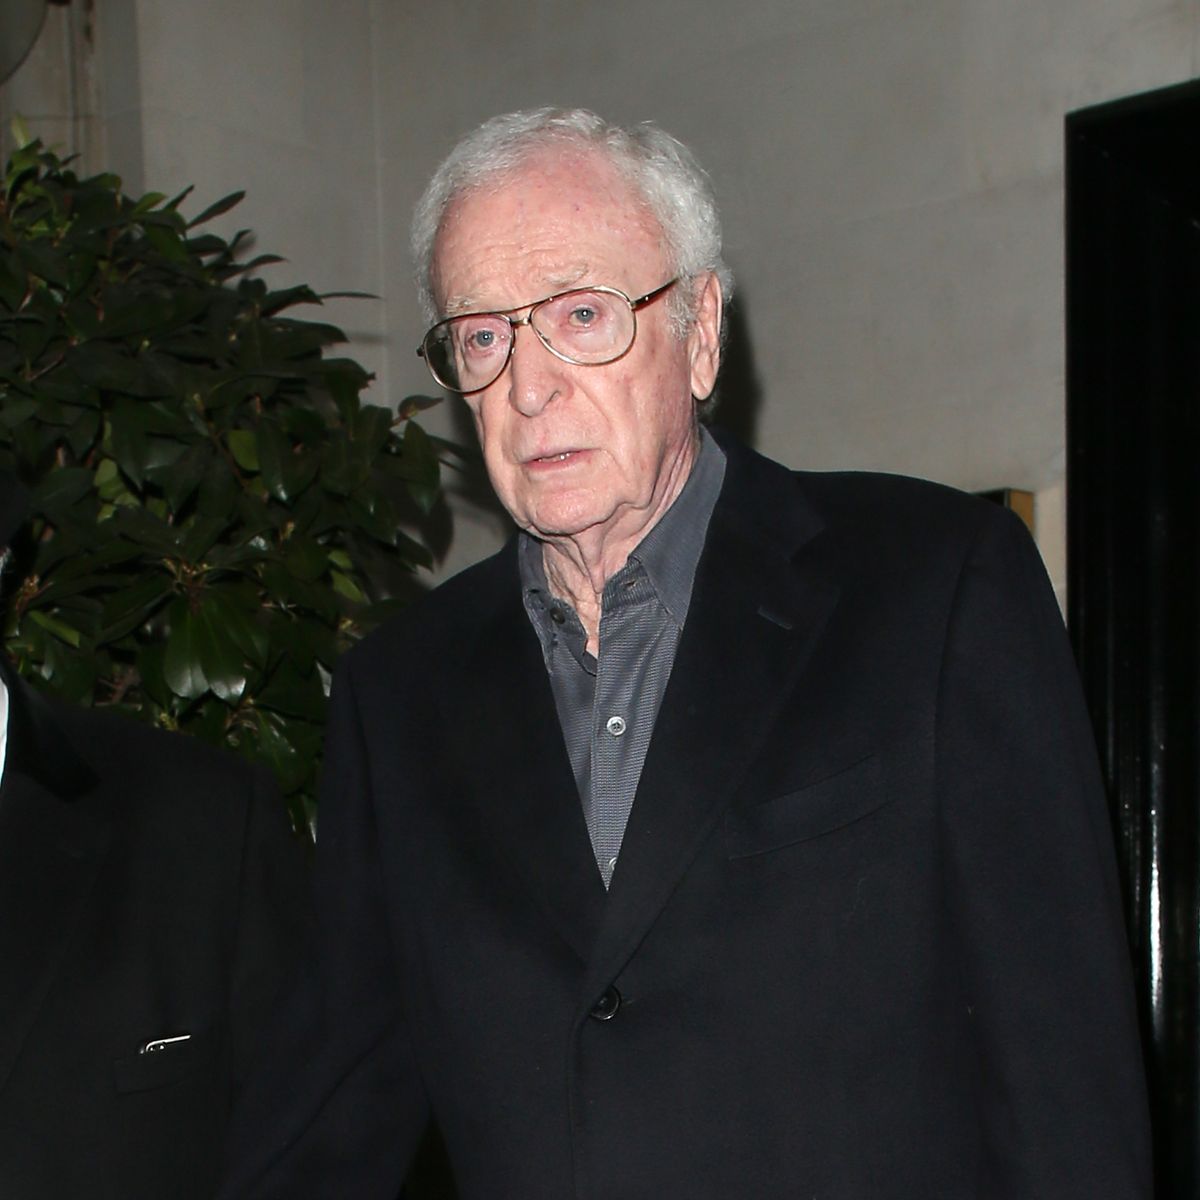 Michael Caine his cancer: I know my days are numbered, want to see